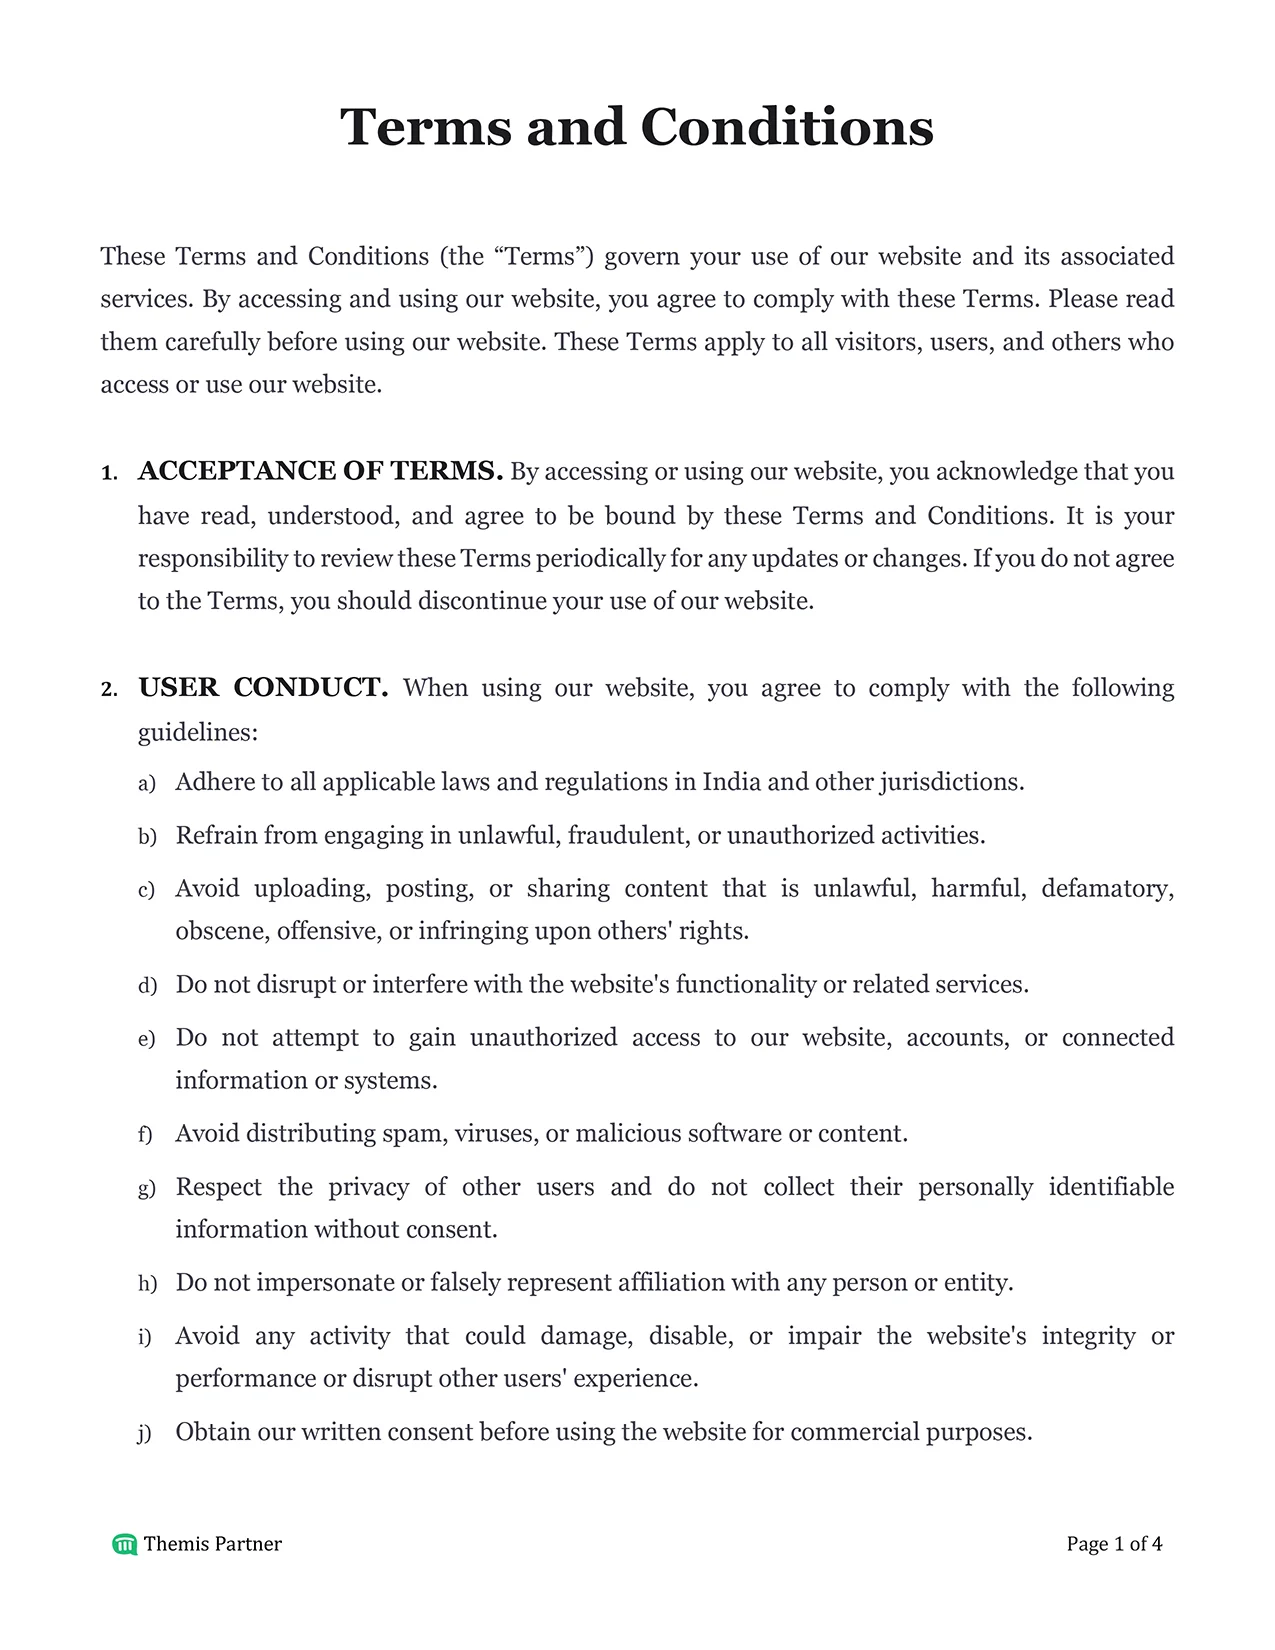 Terms and conditions India 1